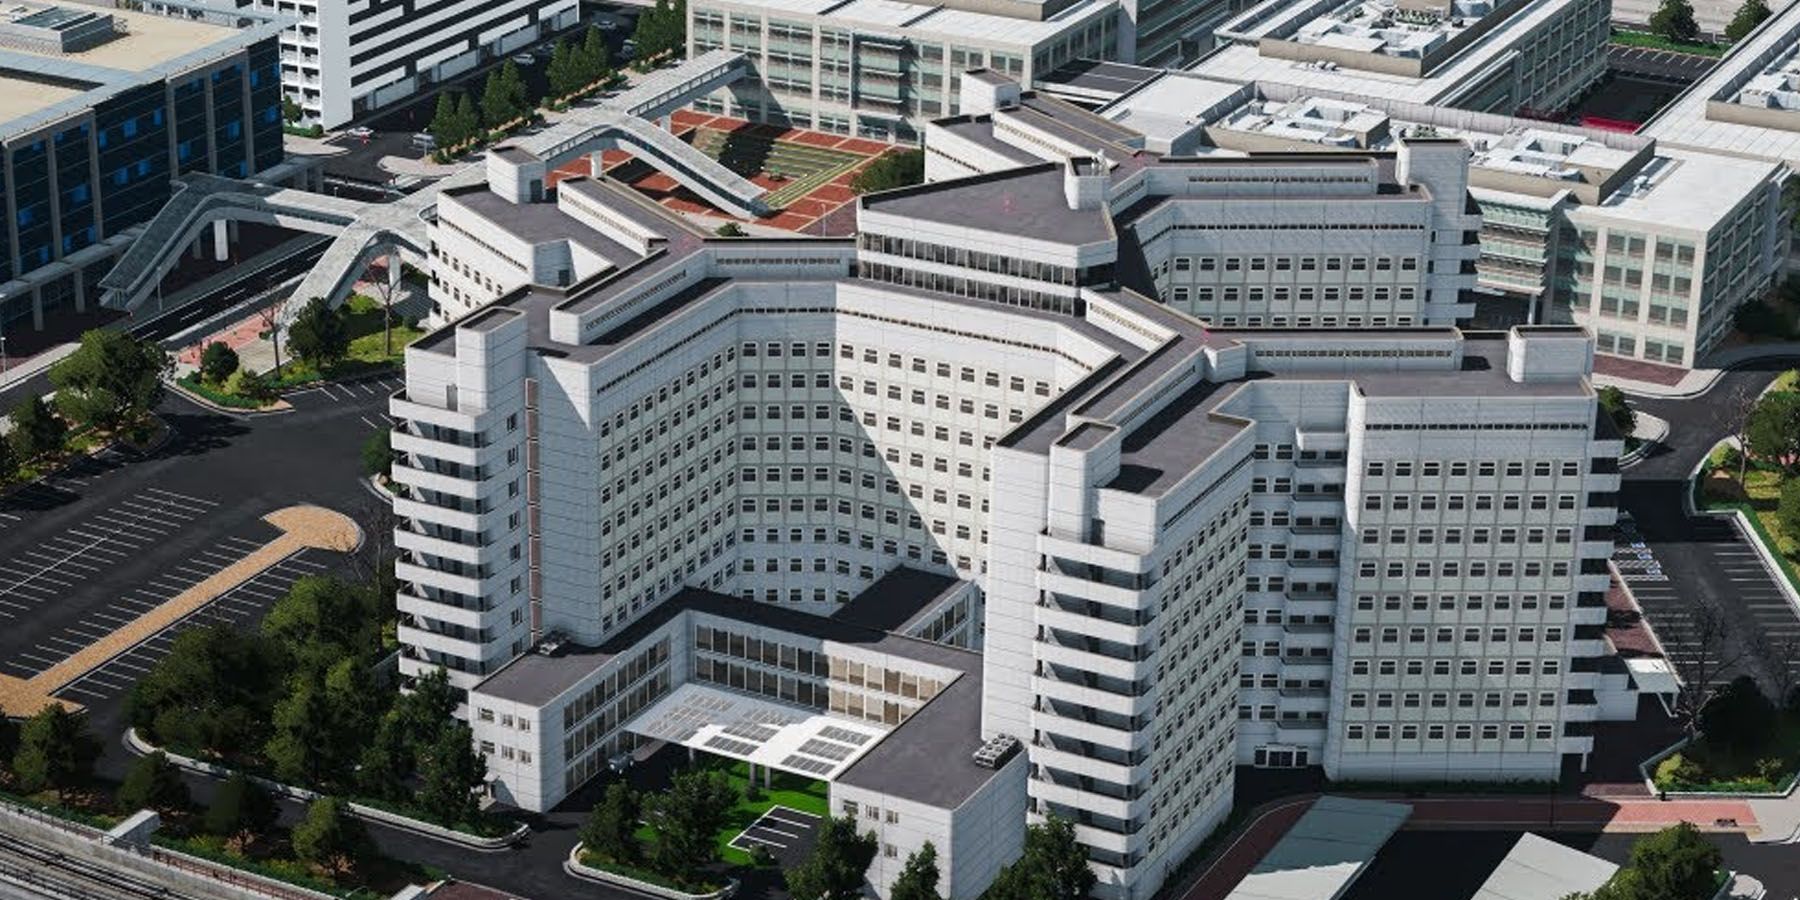 A hospital in Cities Skylines